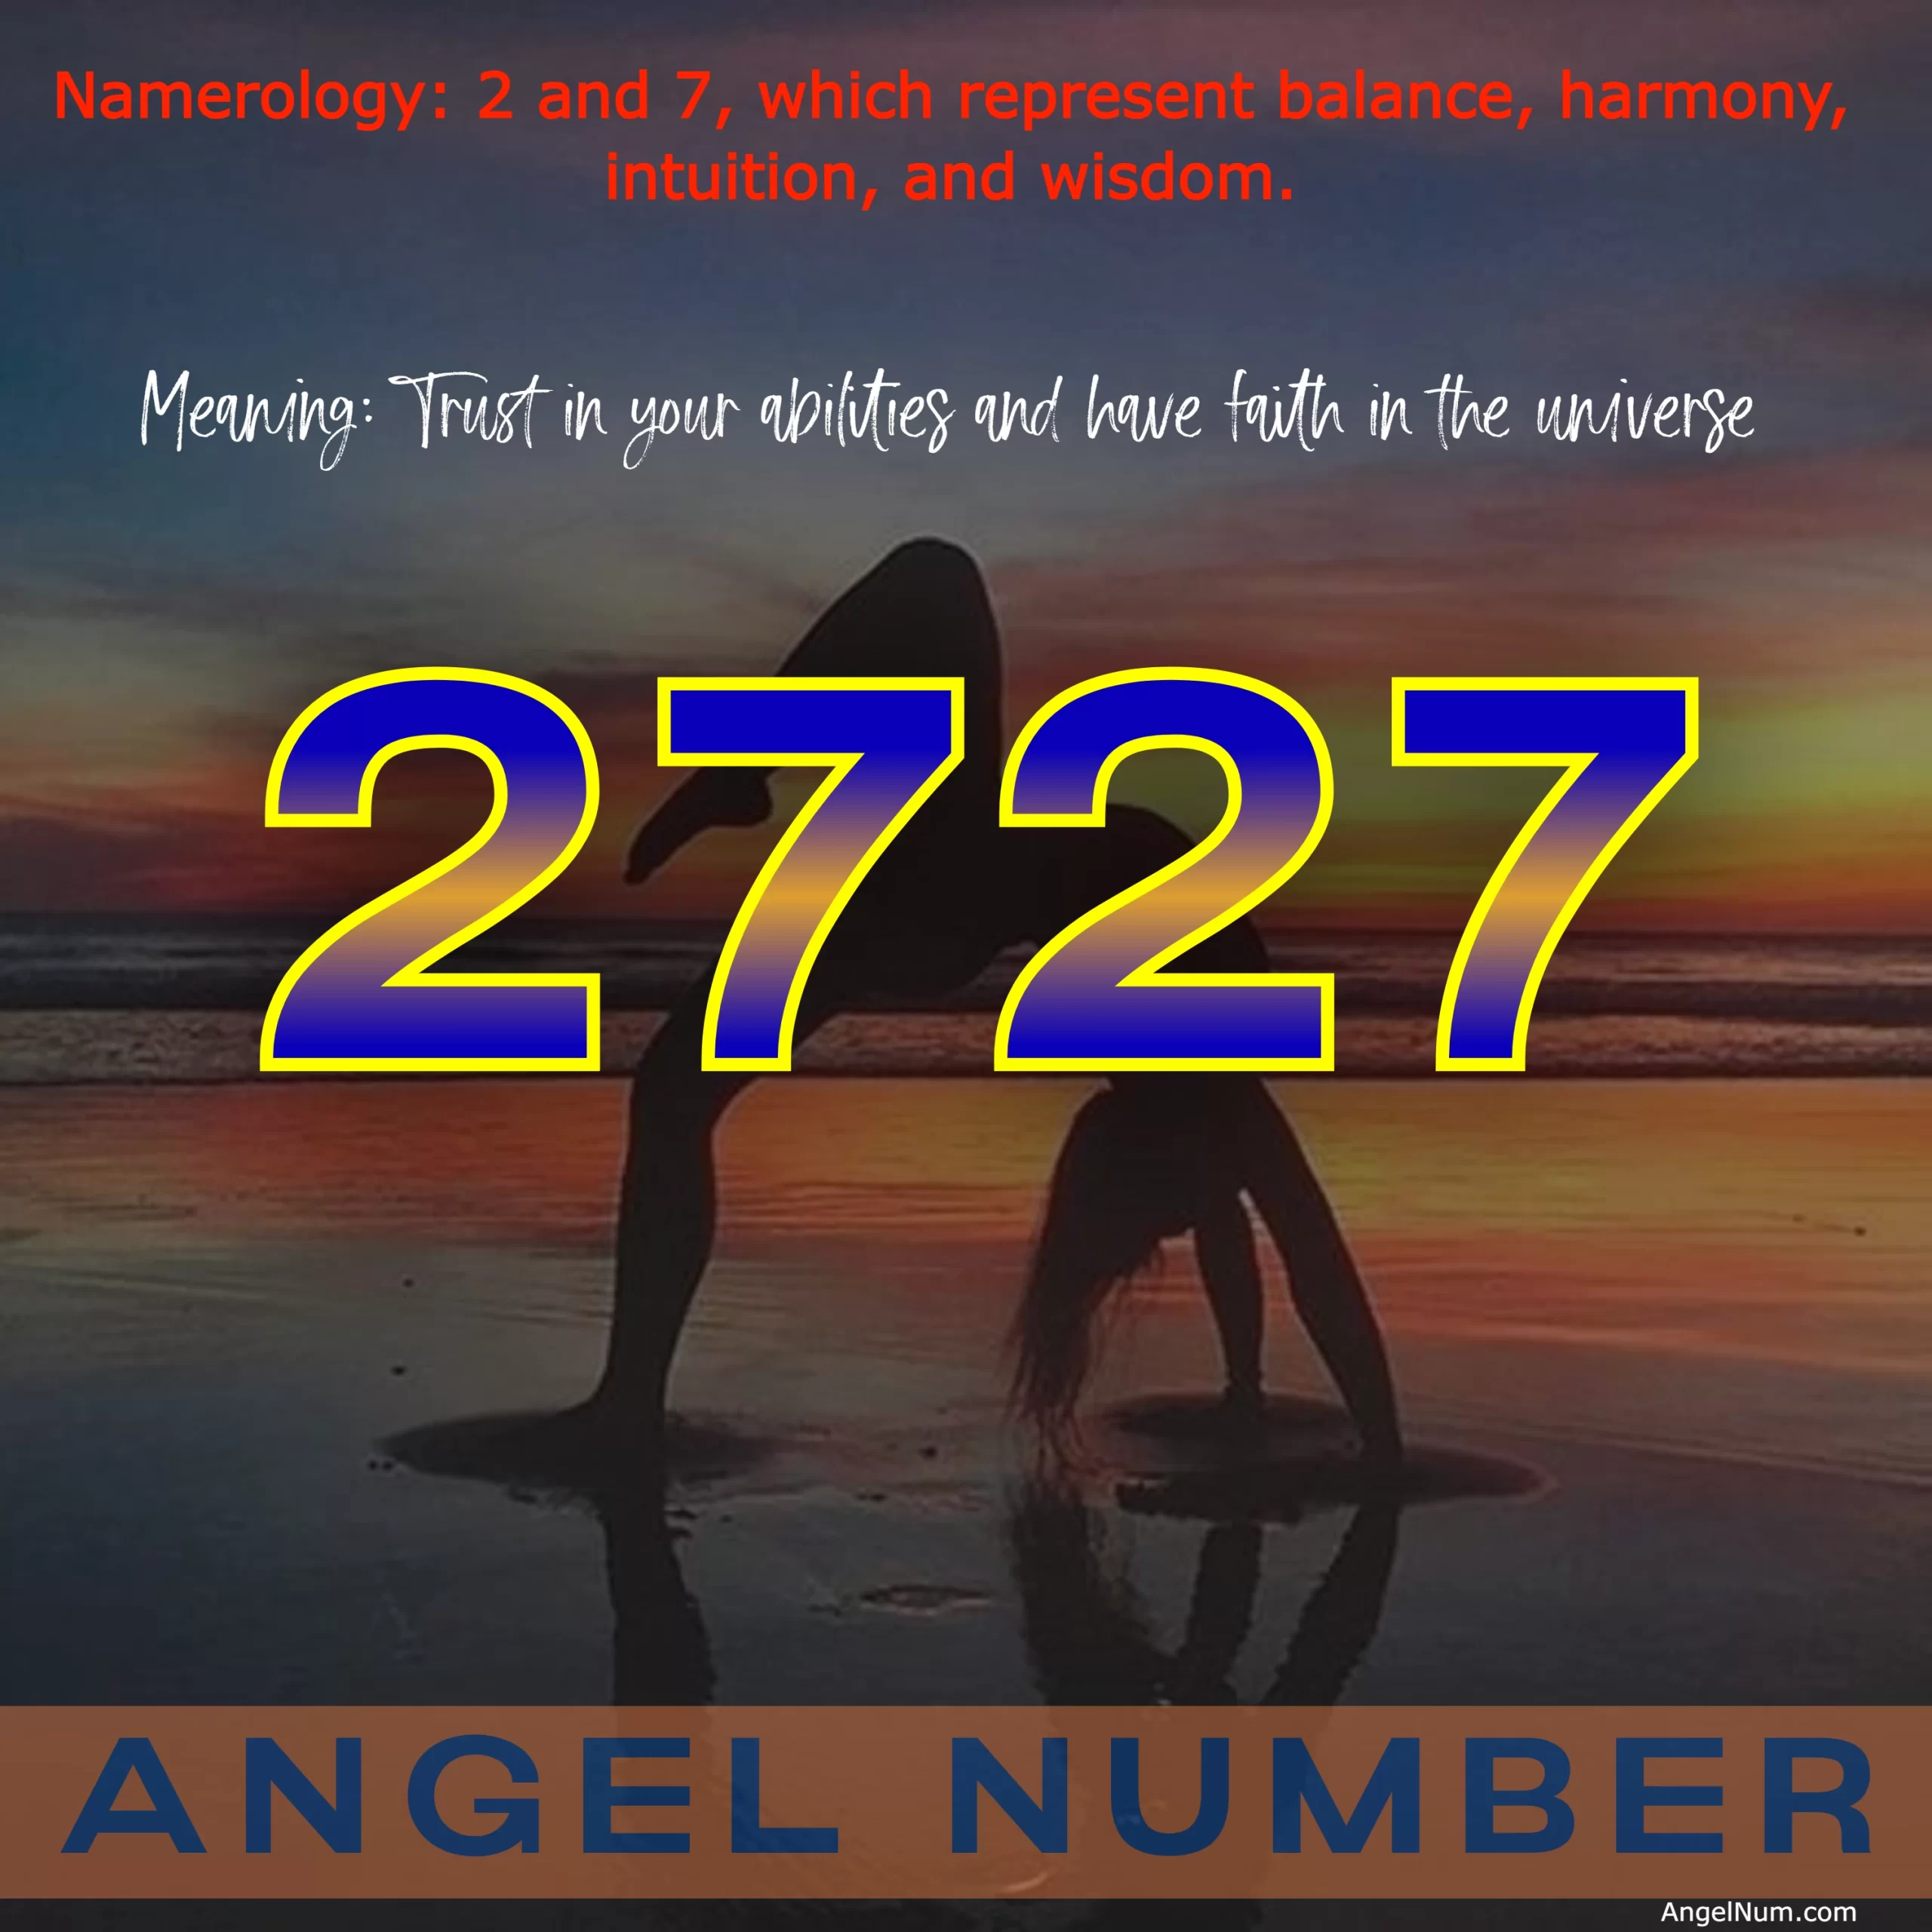 Angel Number 2727: The Spiritual Meaning and Significance